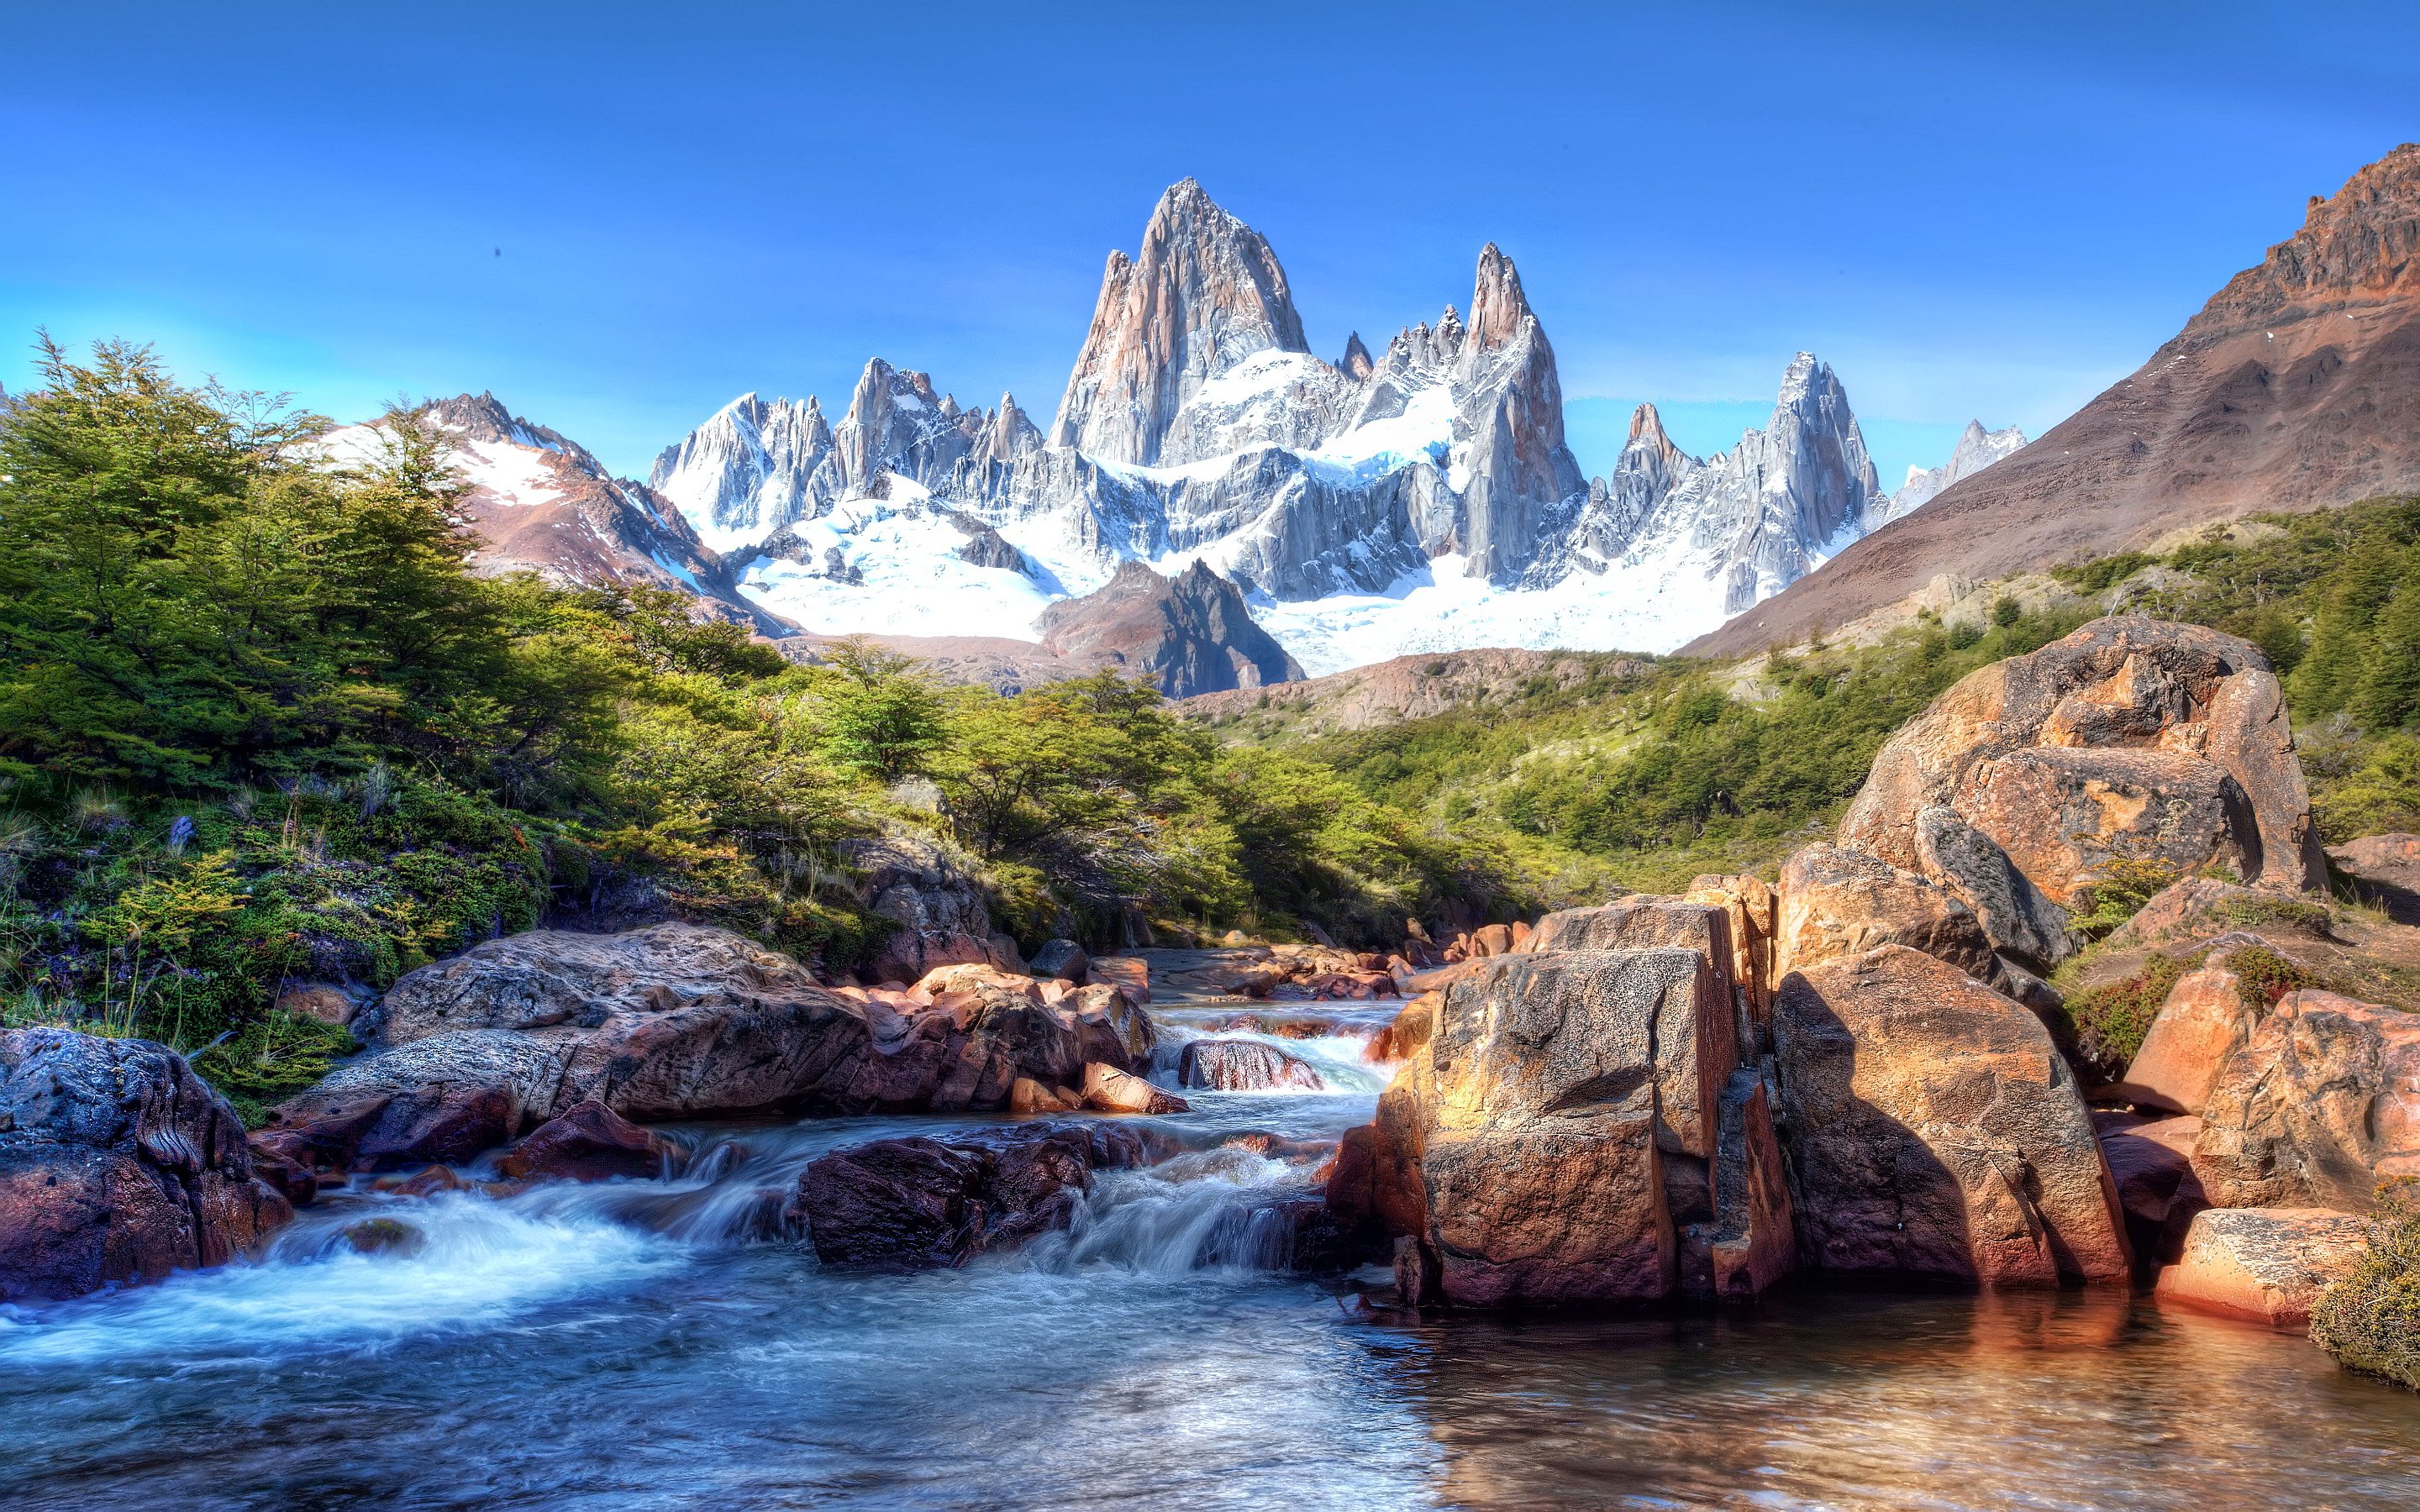 chile, Mountains, Stones, Rivers, Scenery, Snow, Patagonia, Nature Wallpaper